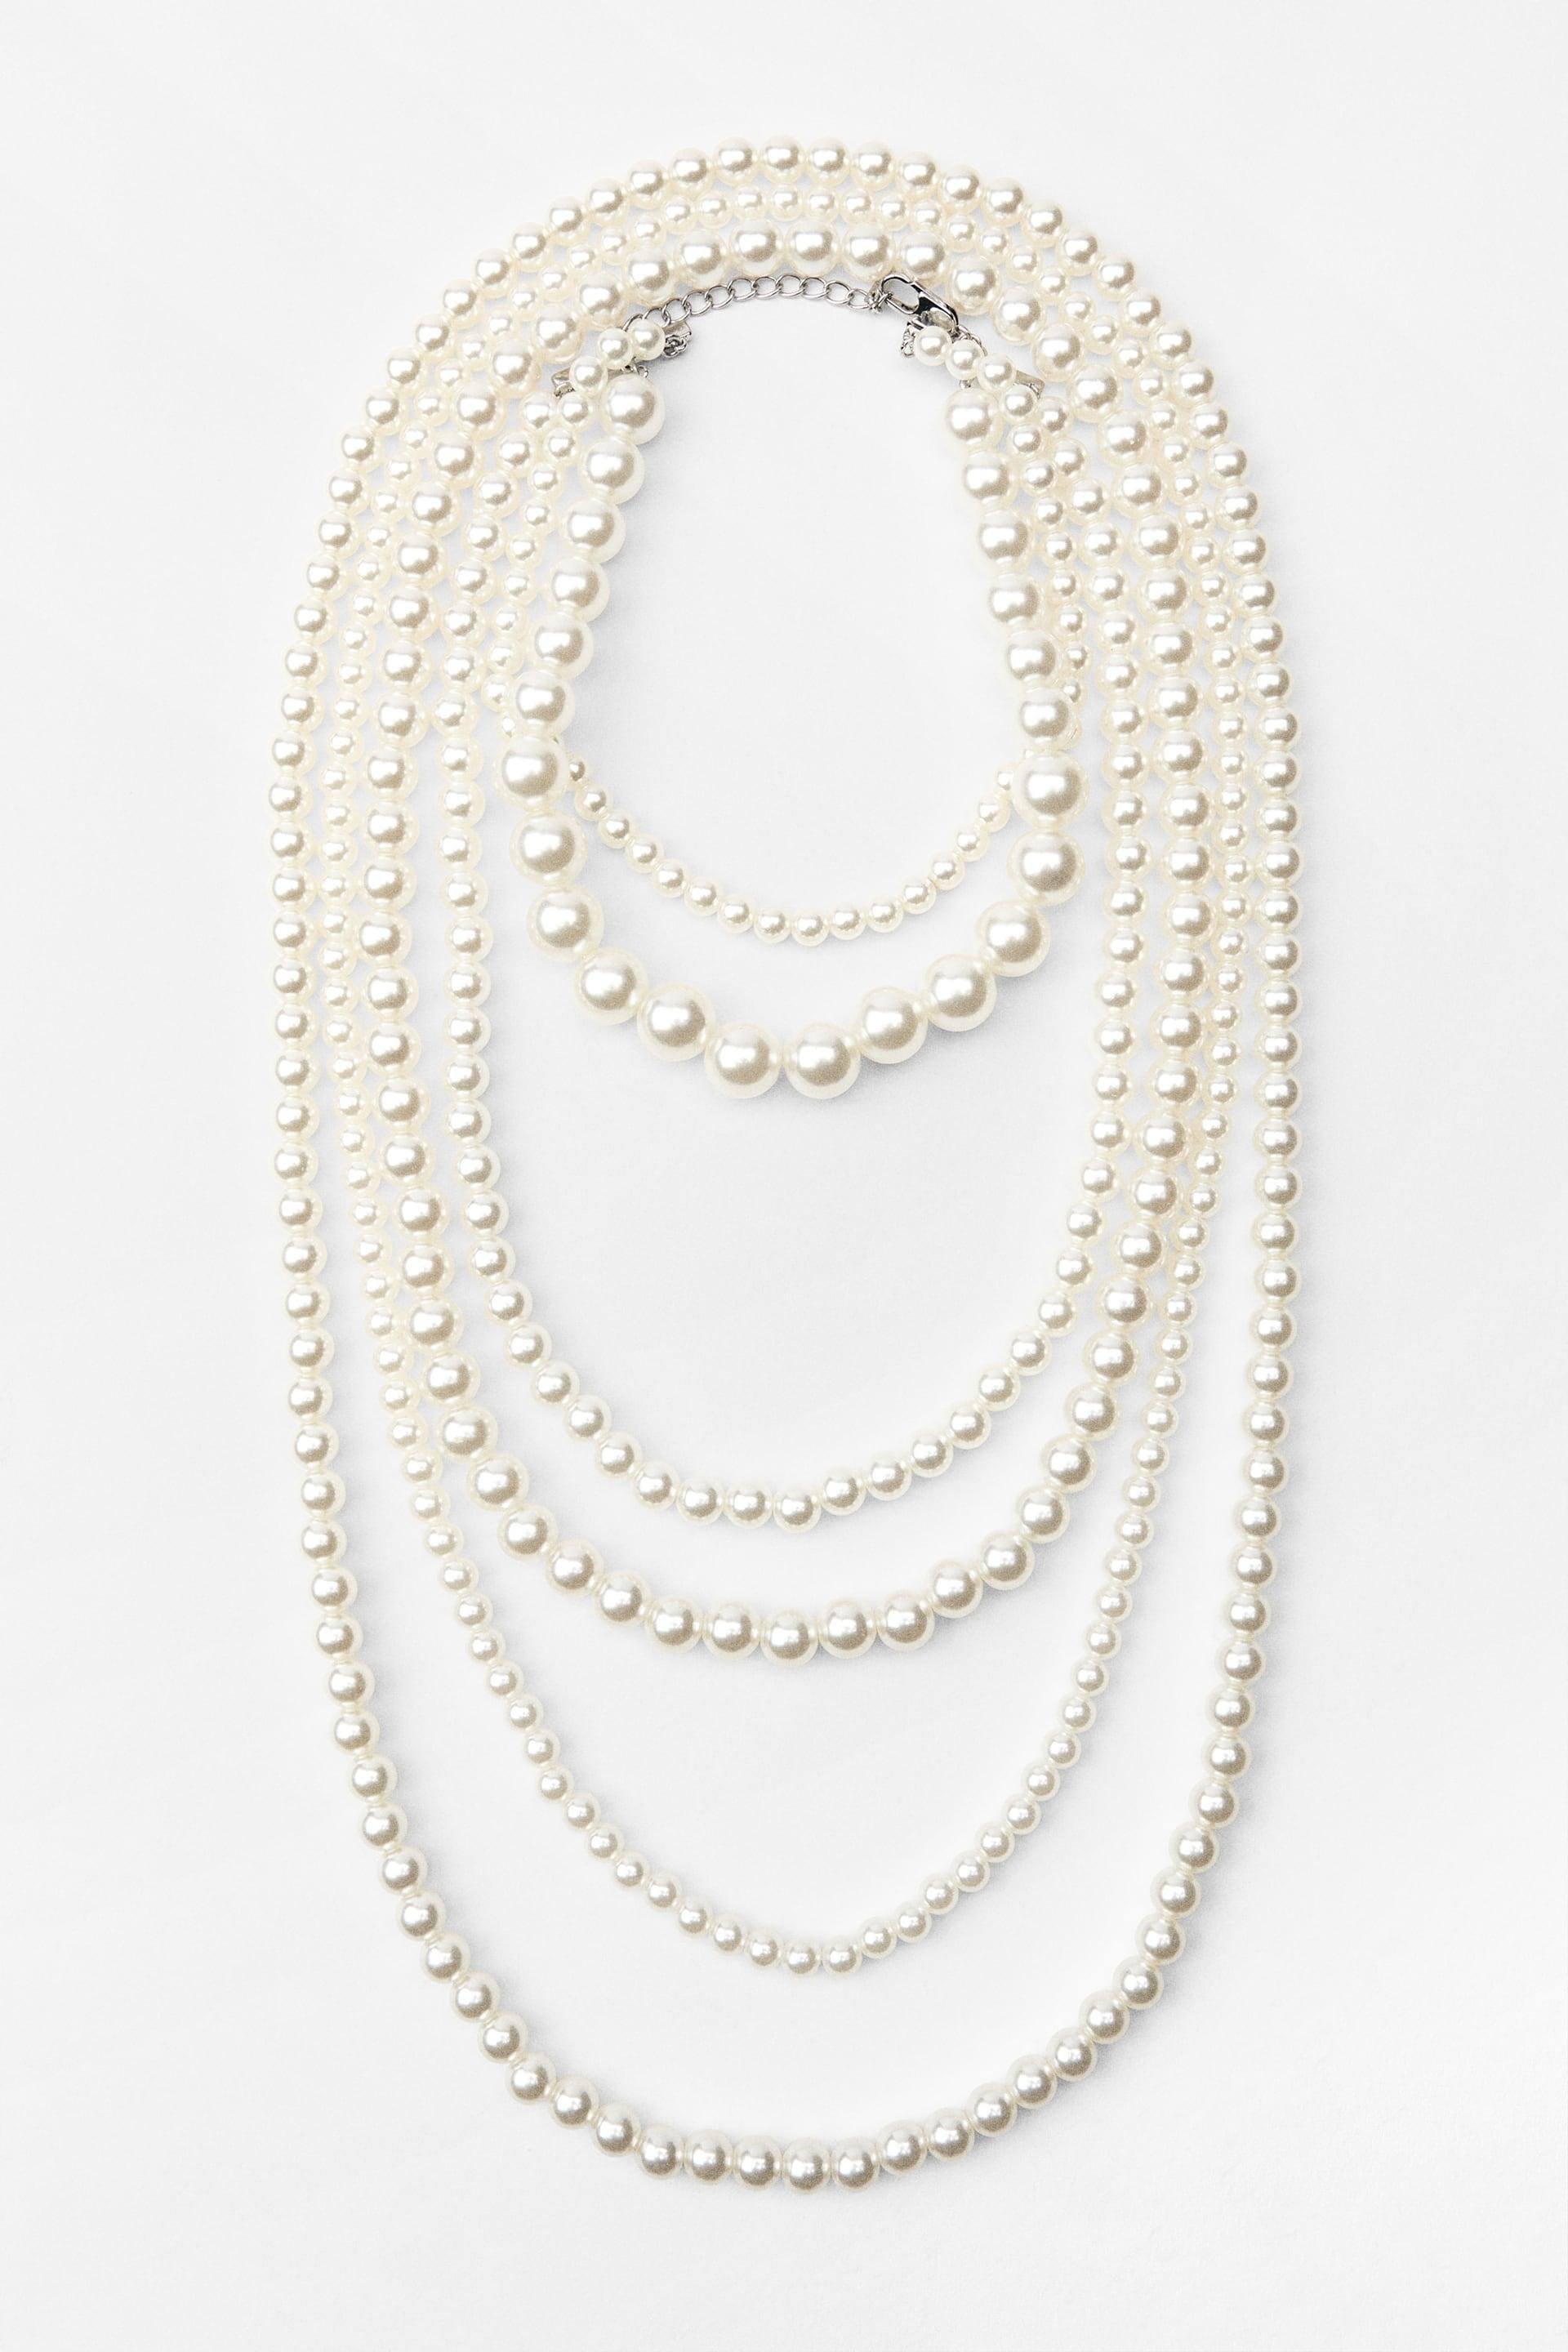 PACK OF PEARL NECKLACES by ZARA